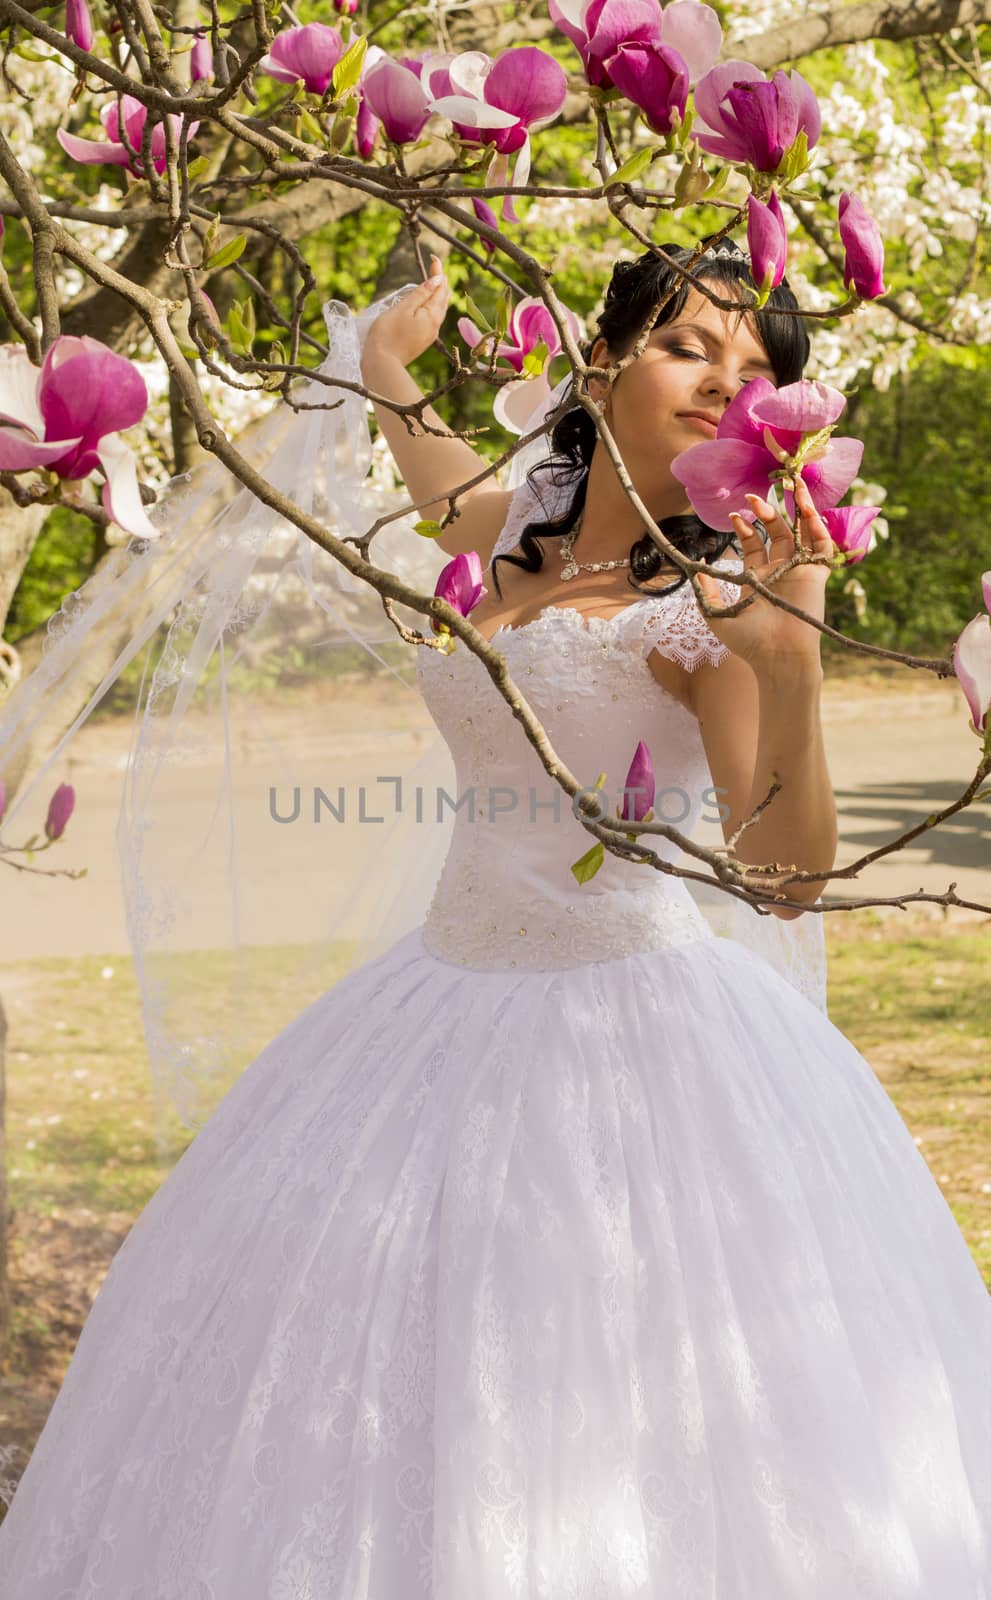 Young happy bride smells flowers magnolia outdoors. For your commercial and editorial use.